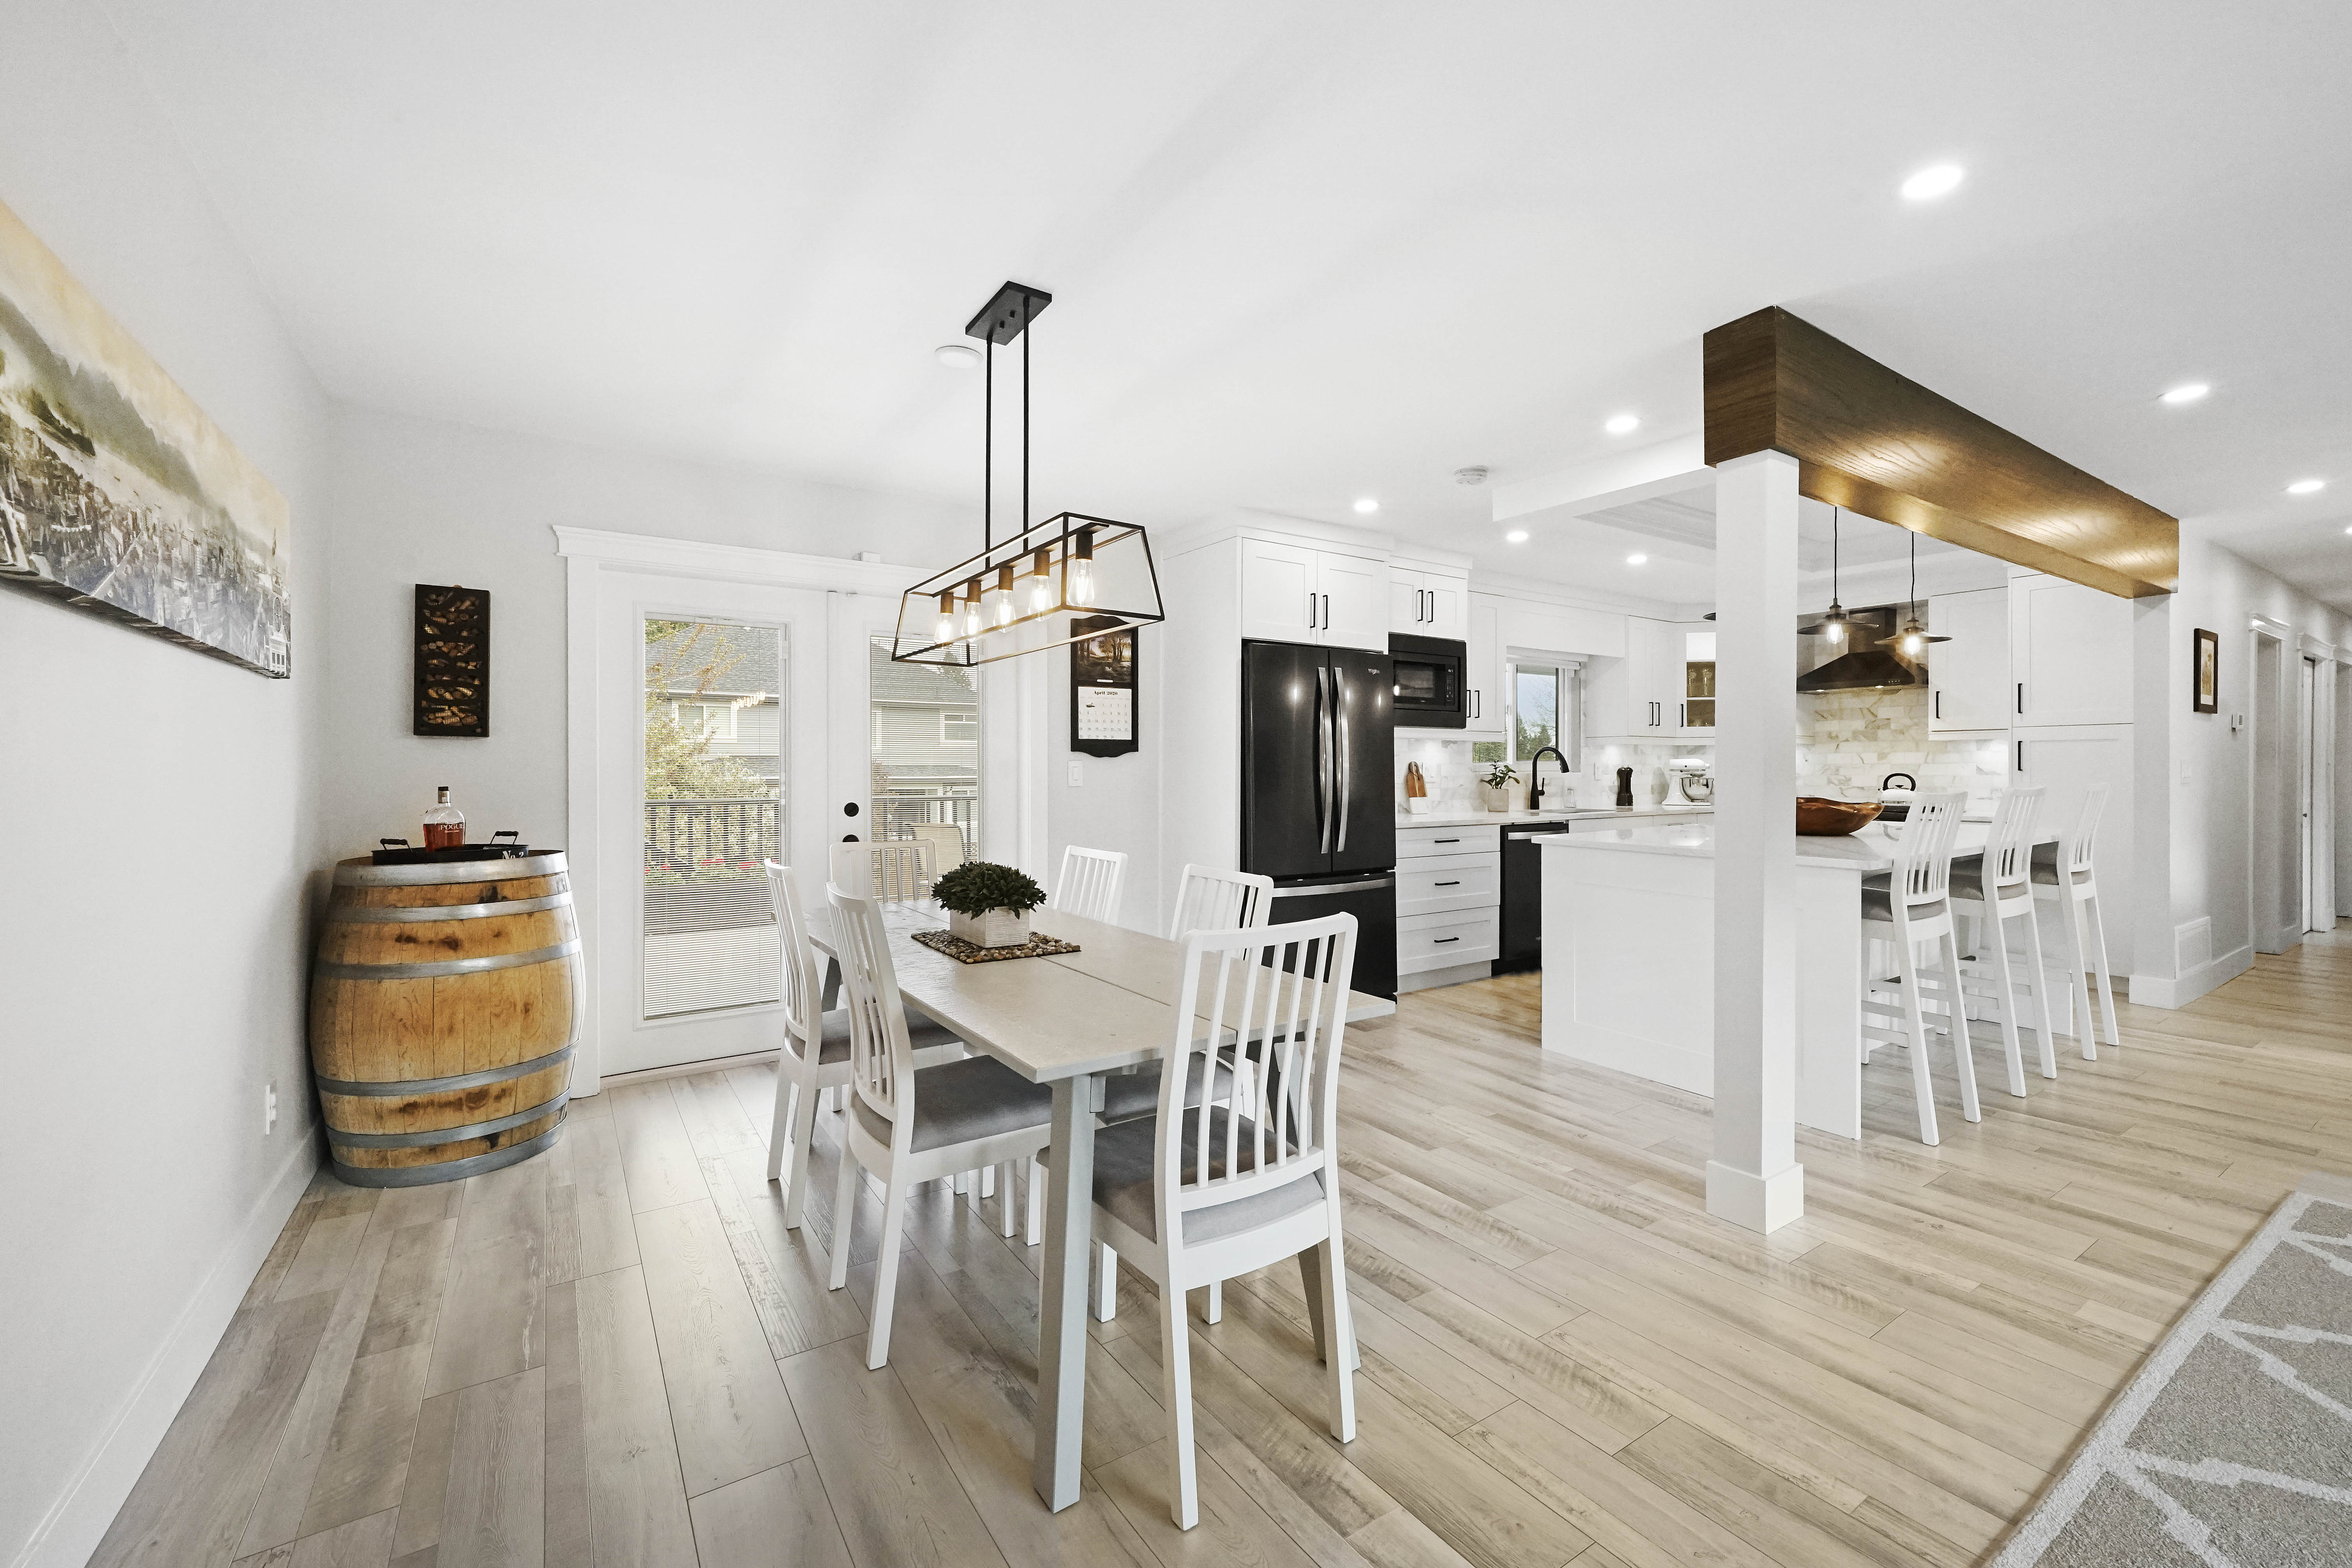 Coquitlam Home Dining and Kitchen